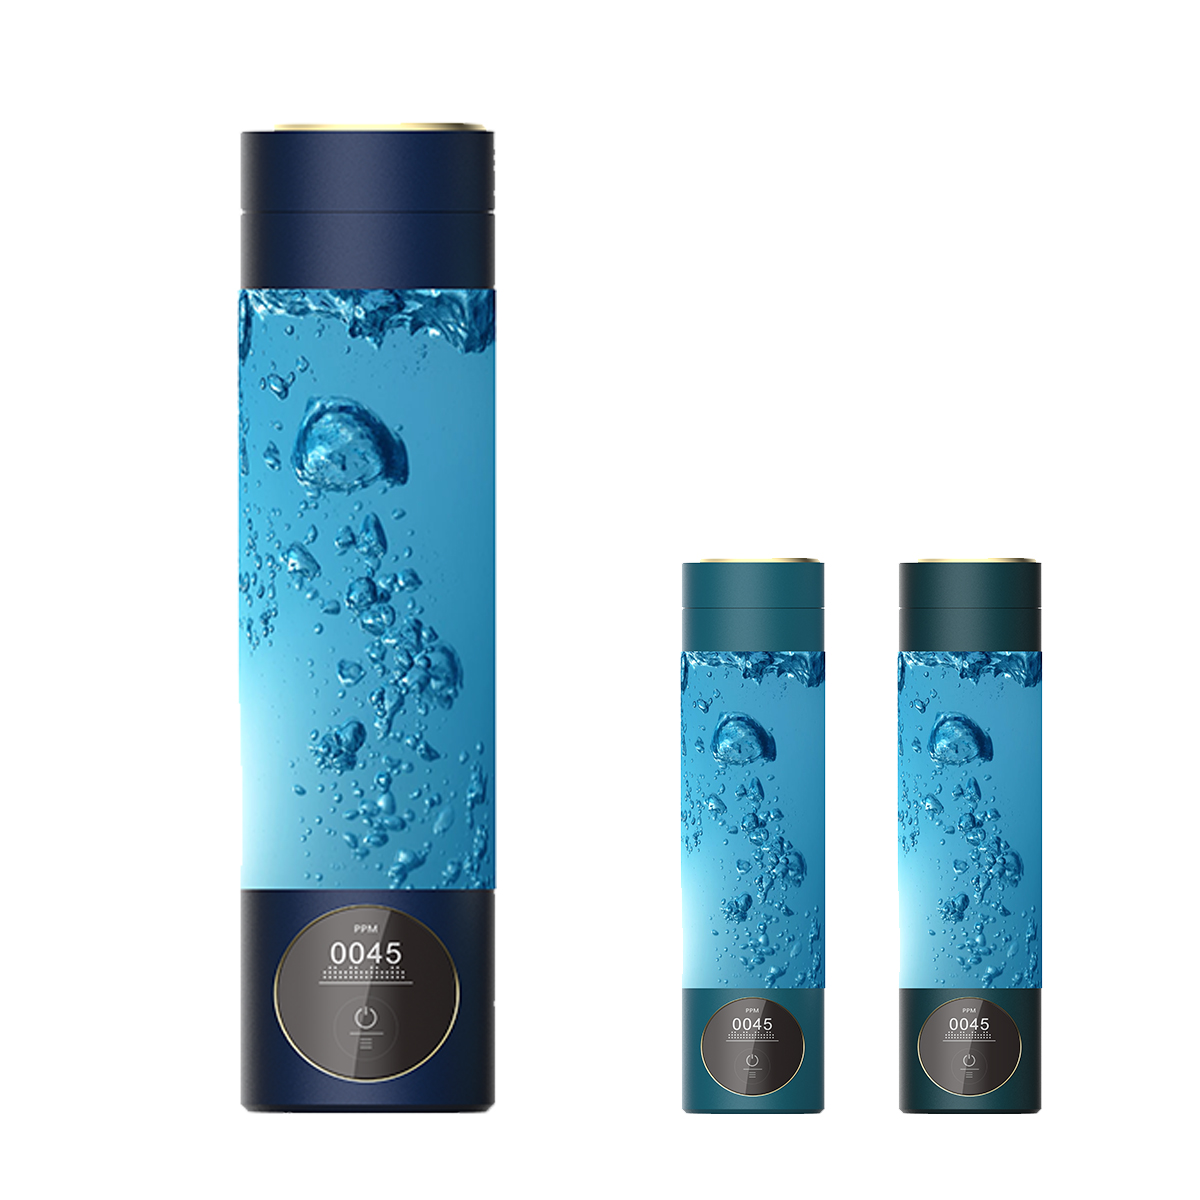 260ml portable Usb rechargeable hydrogen enriched water cup, suitable for both home and outdoor, contact me to know more.